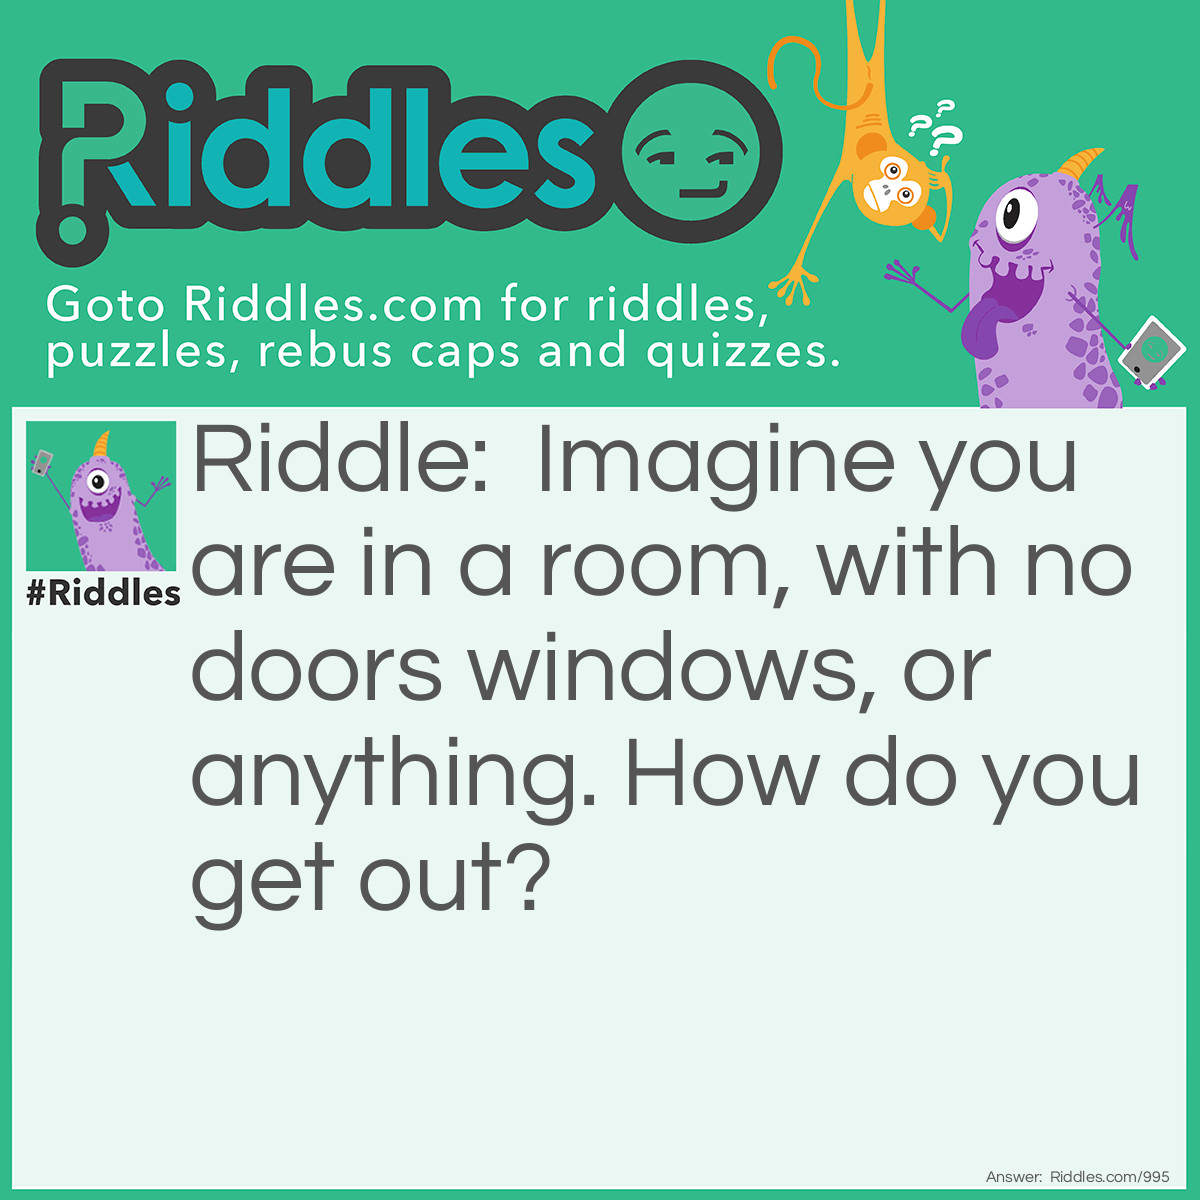 Riddle: Imagine you are in a room, with no doors windows, or anything. How do you get out? Answer: Stop imagining.